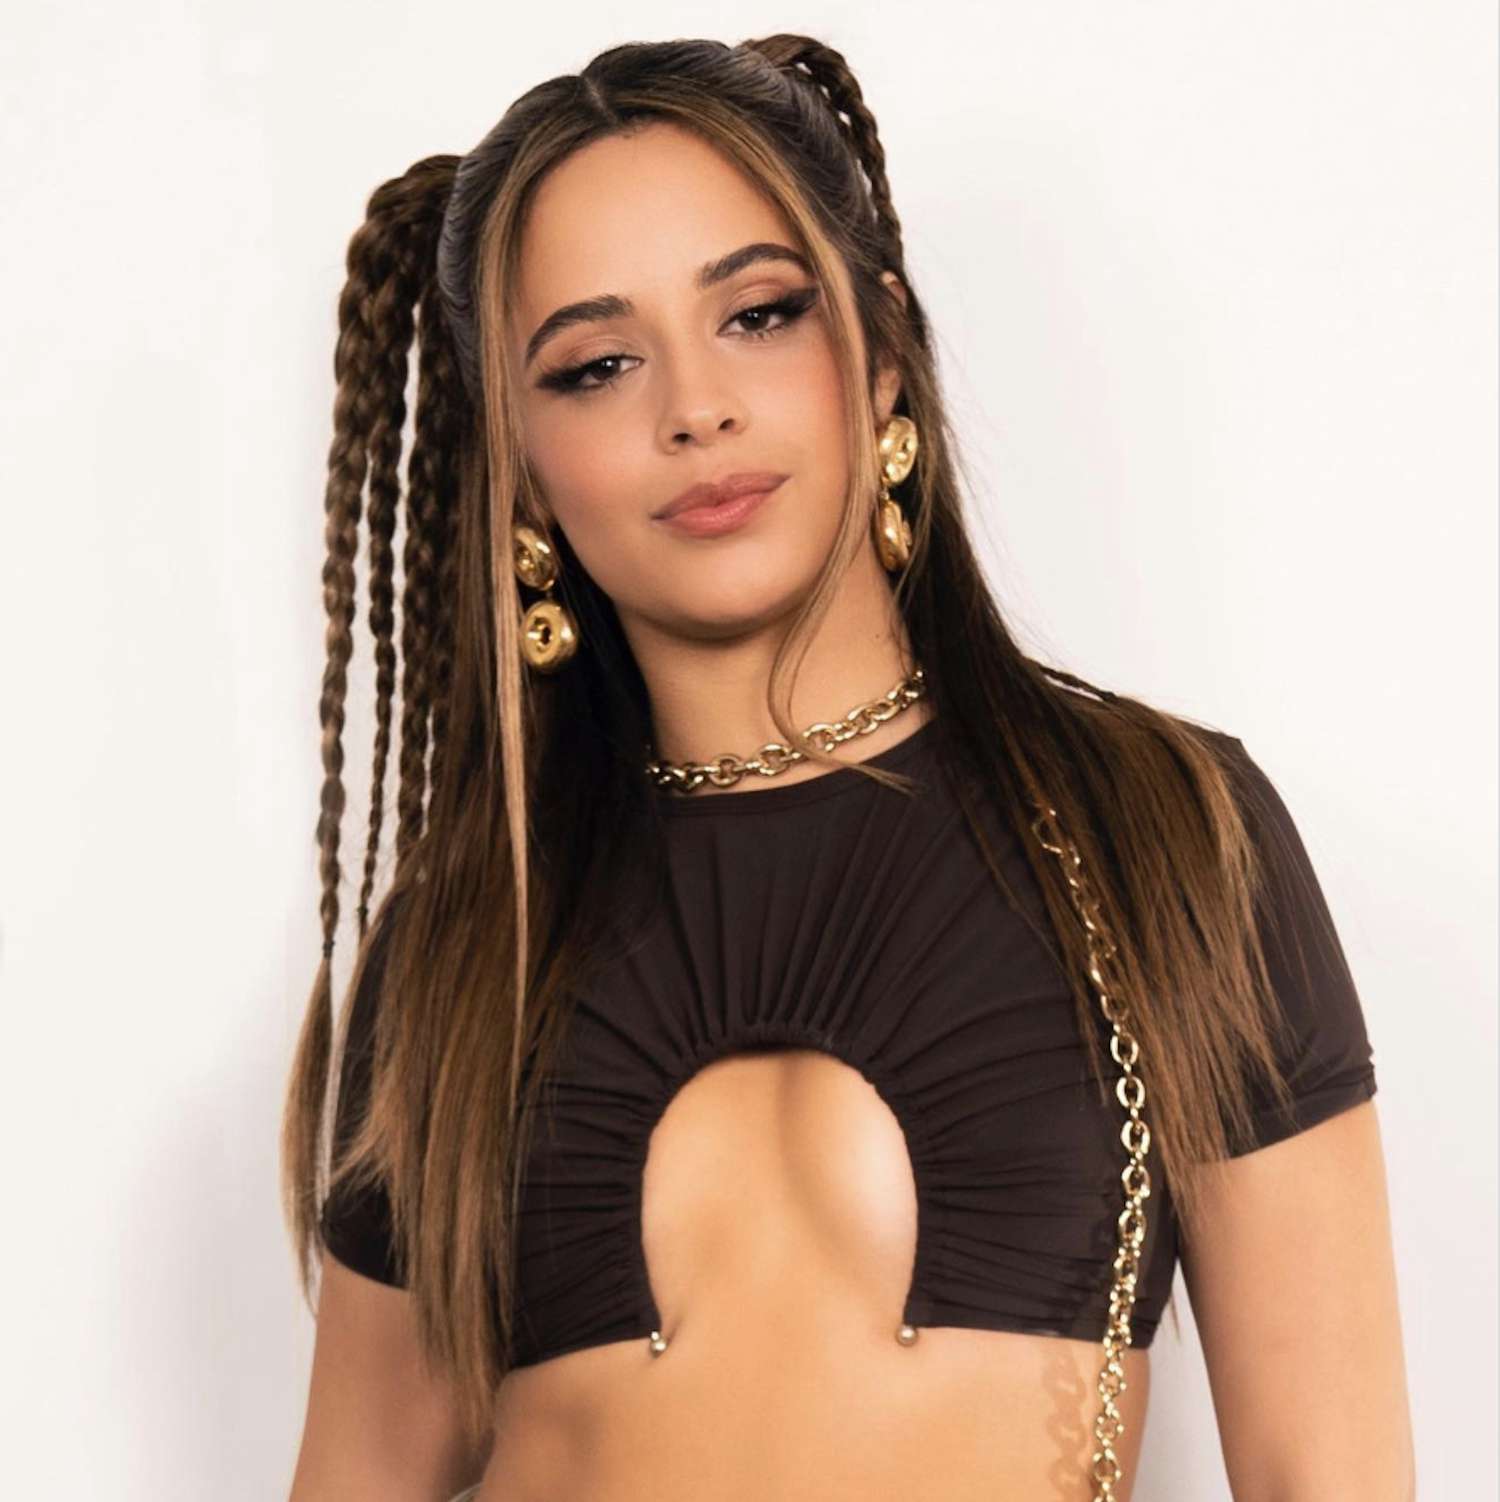 Camila Cabello wears half-up pigtails with multiple braids and a black crop top